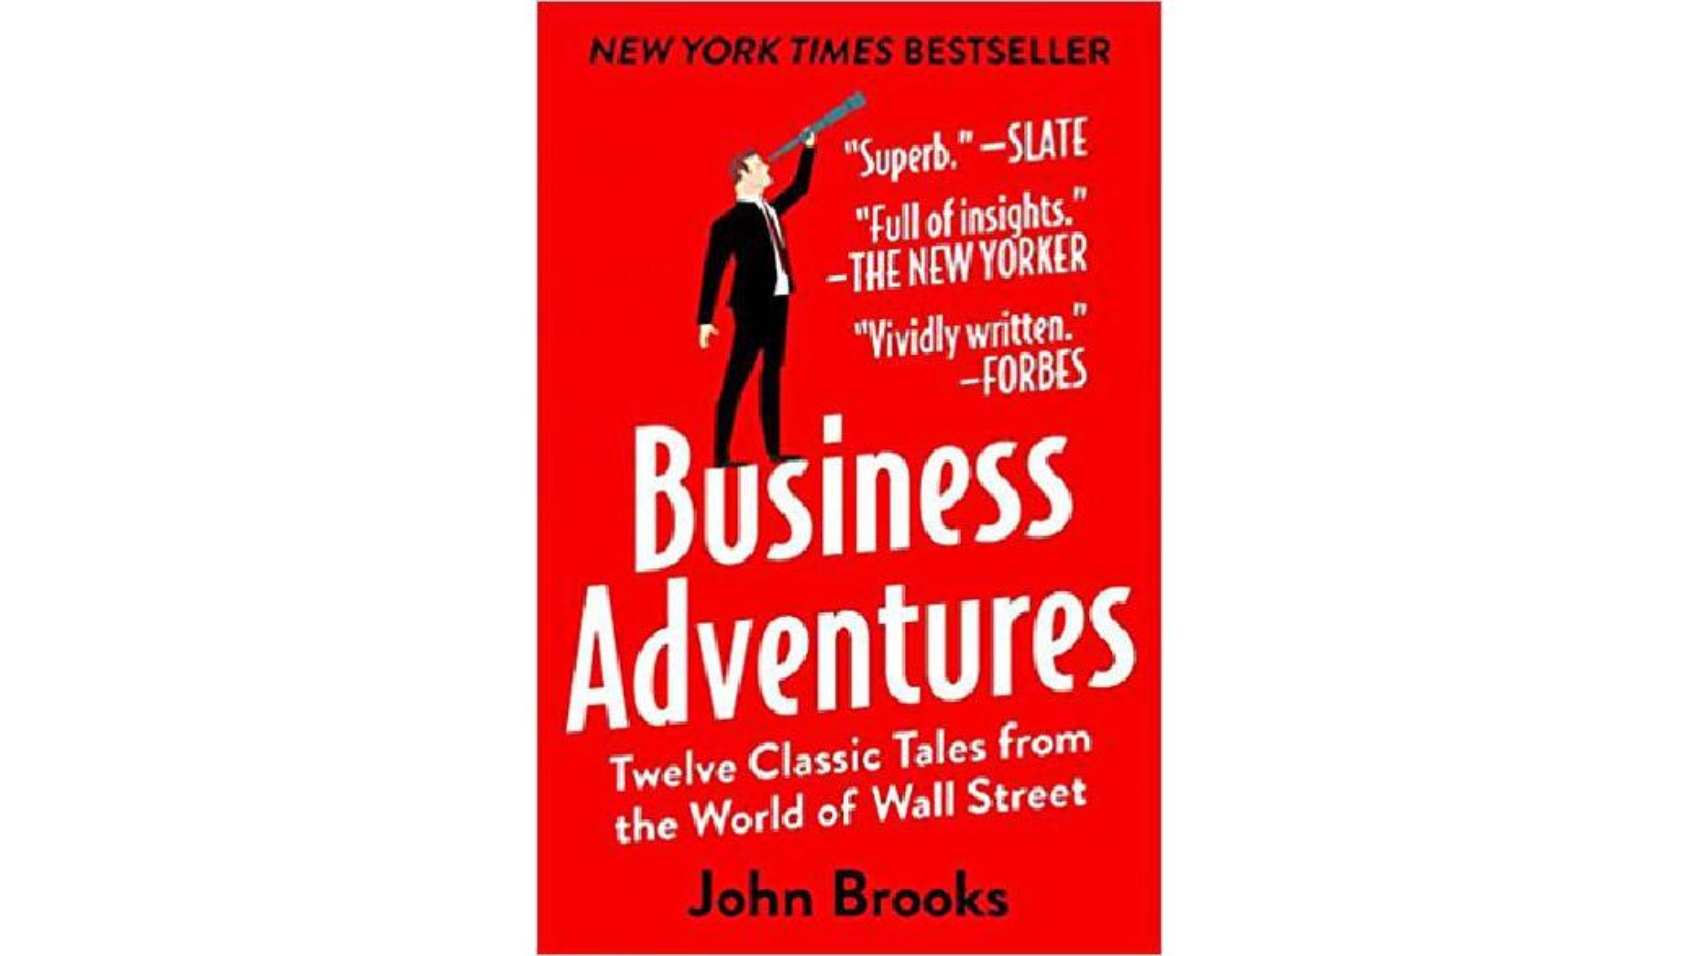 tcl-Business-Adventures-Twelve-Classic-Tales-from-the-World-of-Wall-Street-John-Brooks